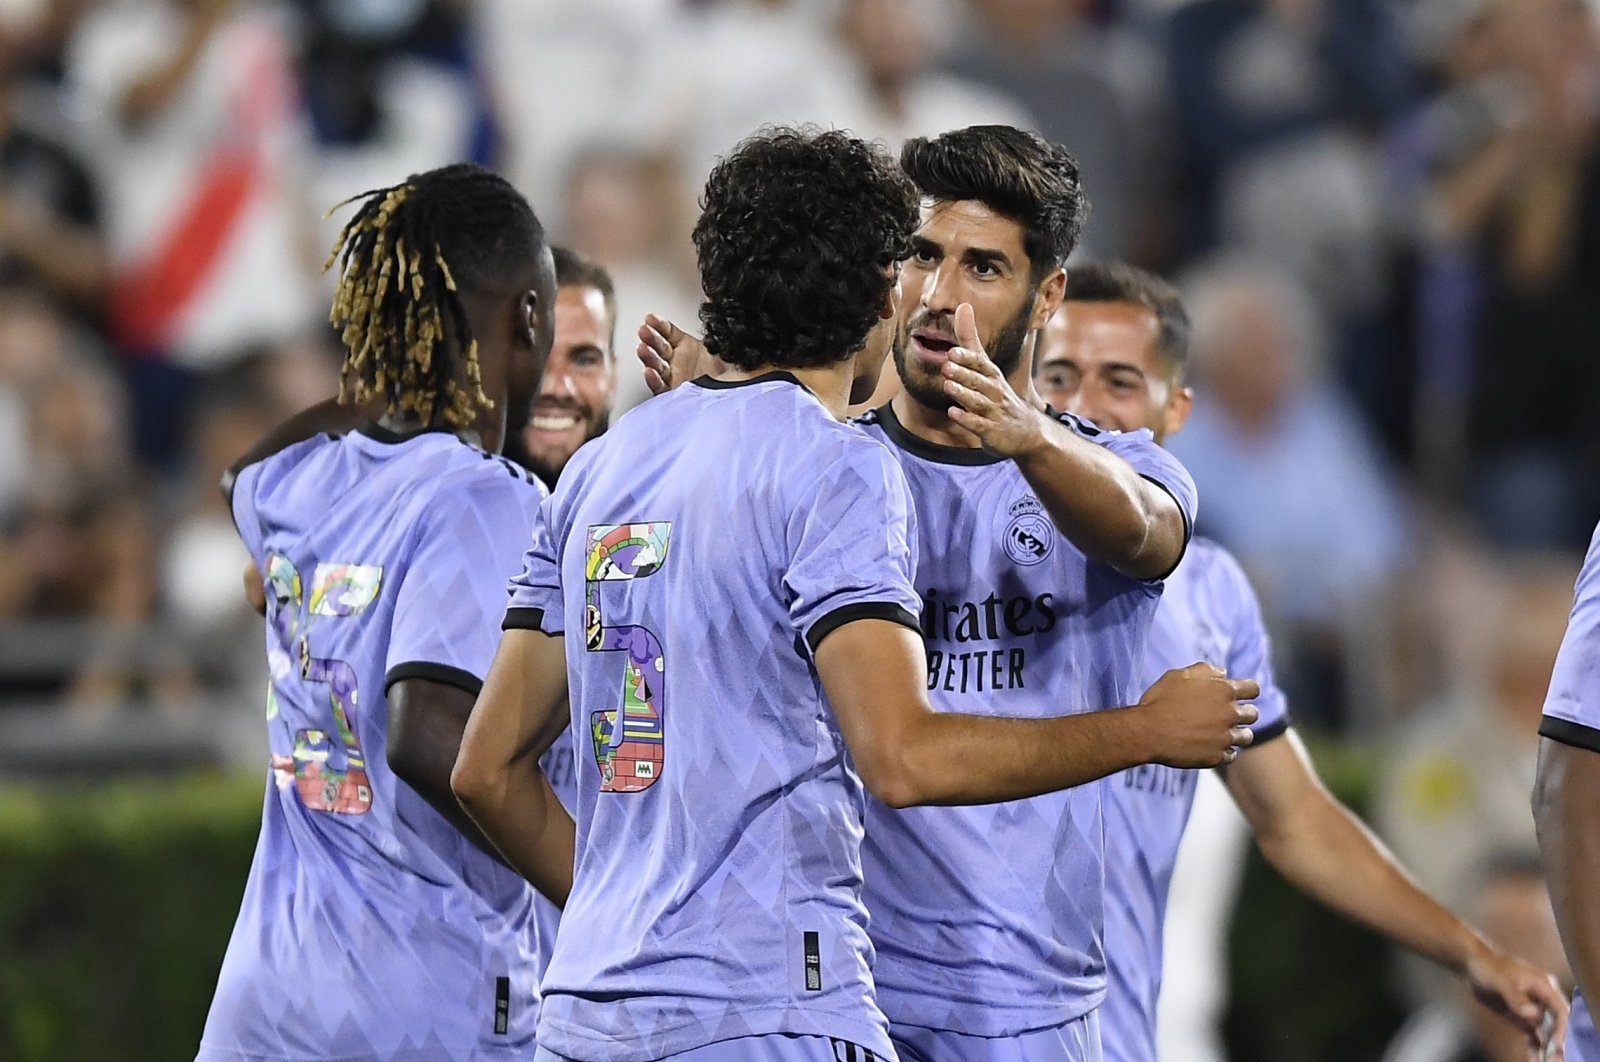 Real Madrid players celebrate a goal in friendly match against Juventus, Pasadena, California, U.S., July 30, 2022. (AFP Photo)